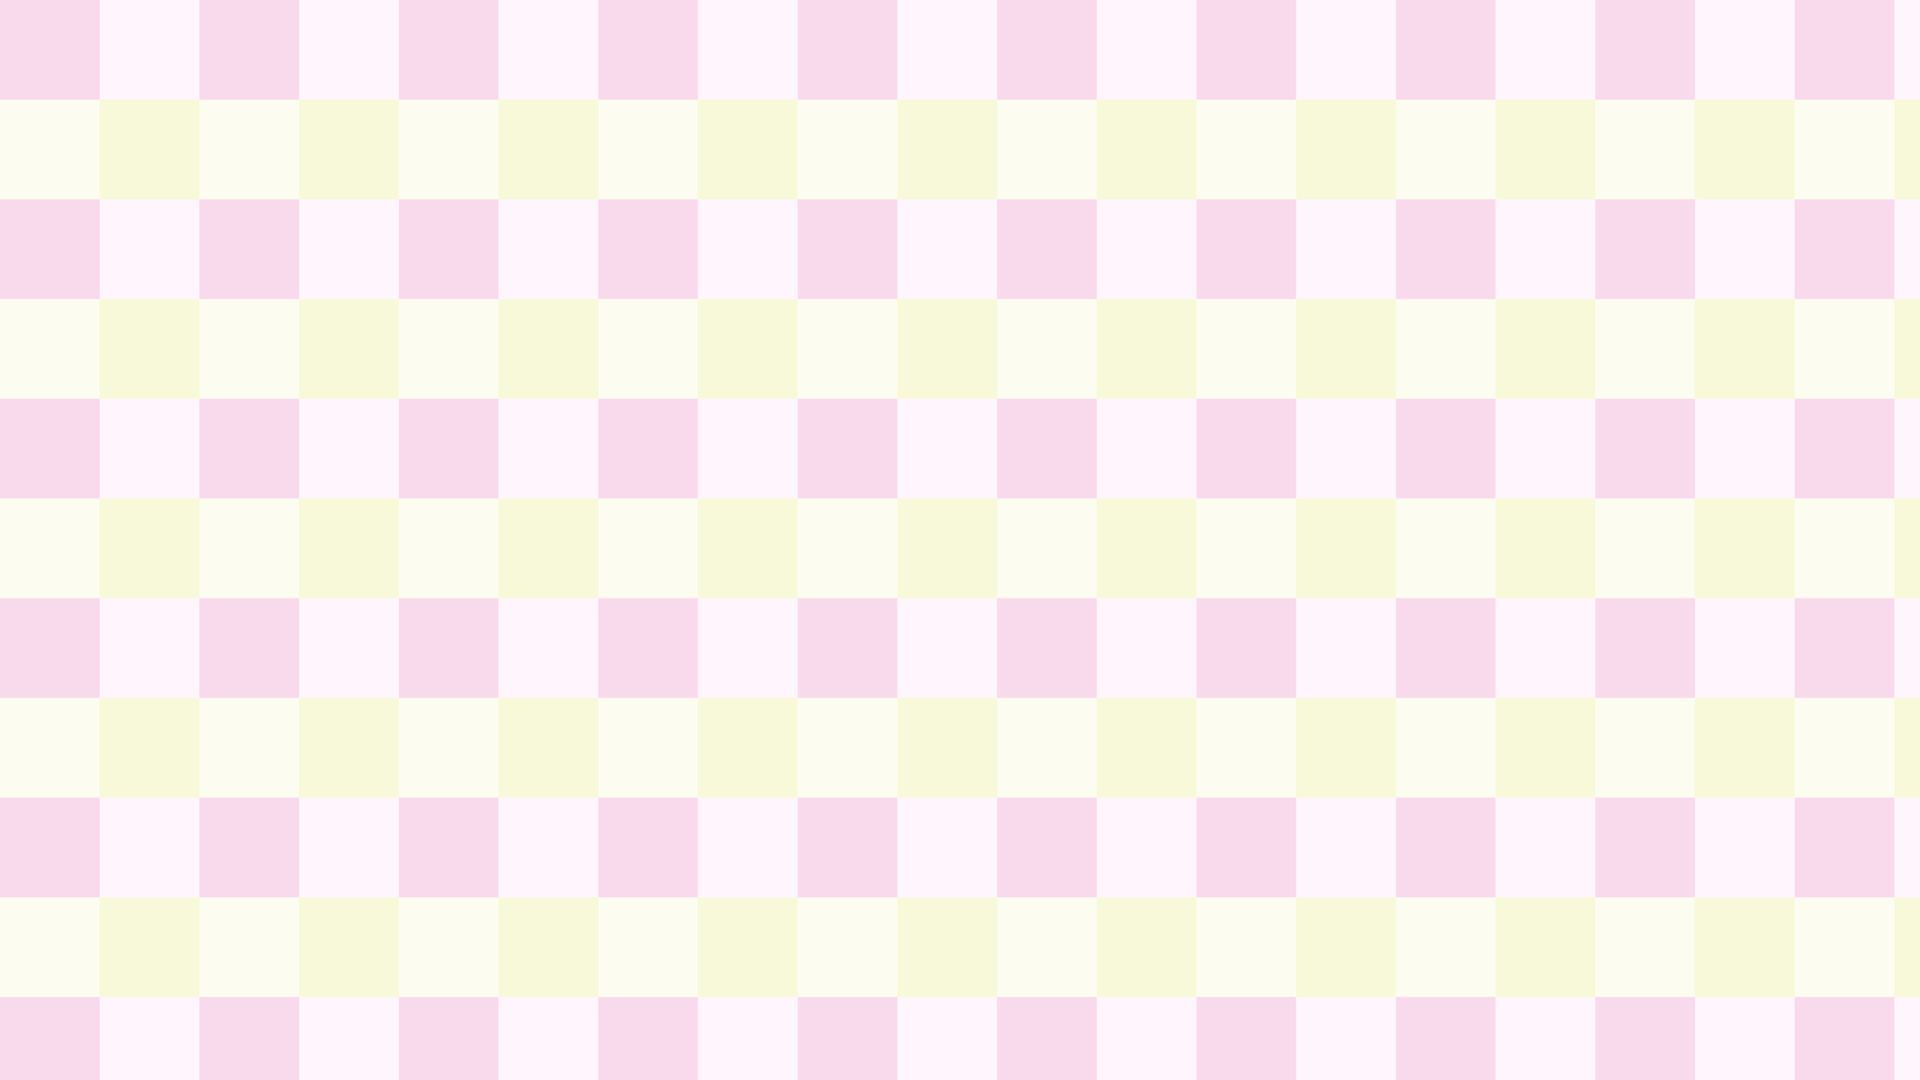 A pink and white checkered background - Light pink, light yellow, checkered